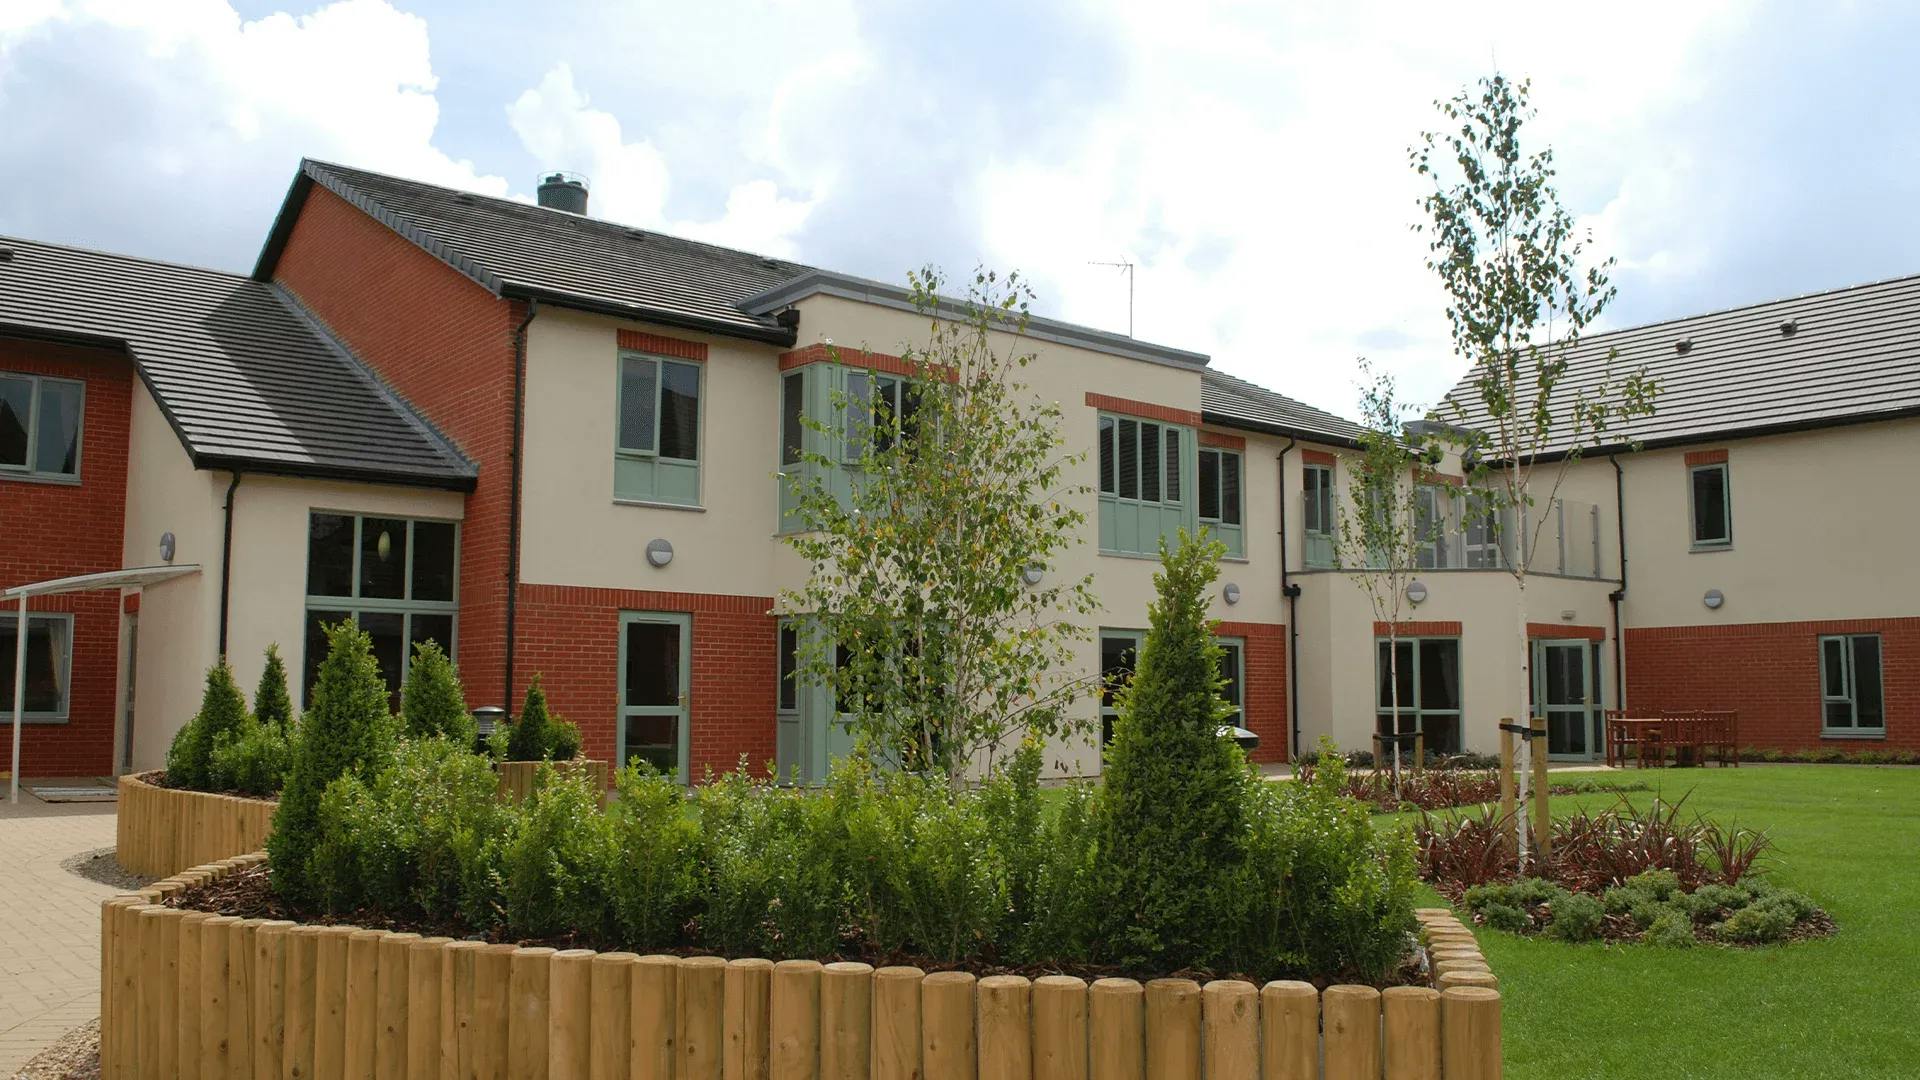 Exterior photo of Newcross Care Home in Wolverhampton